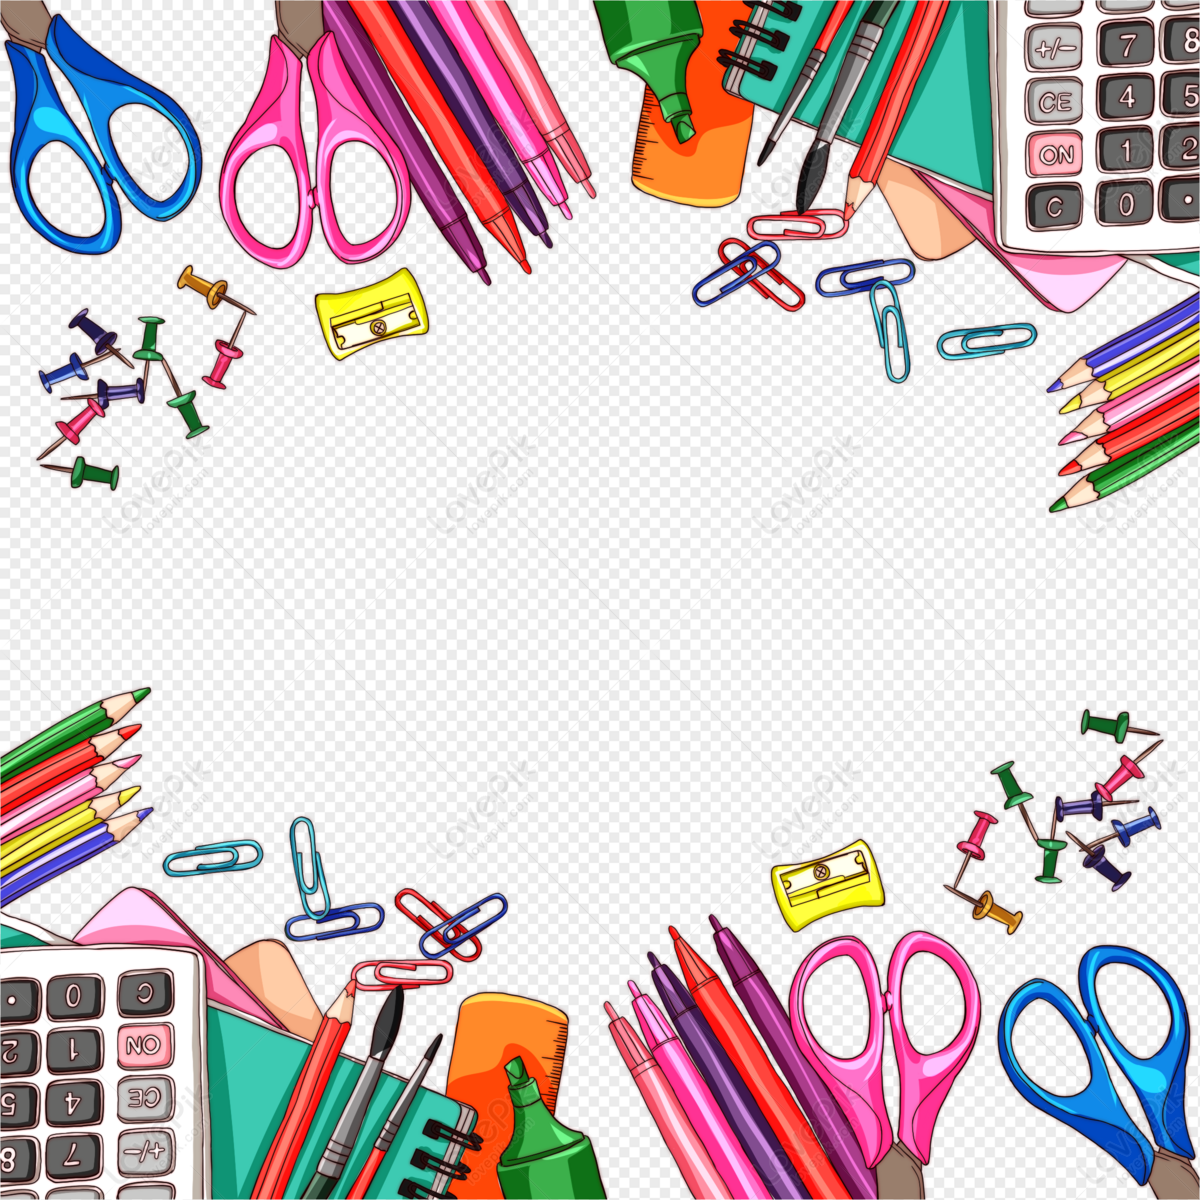 Stationery Stickers White Transparent, Stationery Stickers, Stationery,  Education, Training PNG Image For Free Download